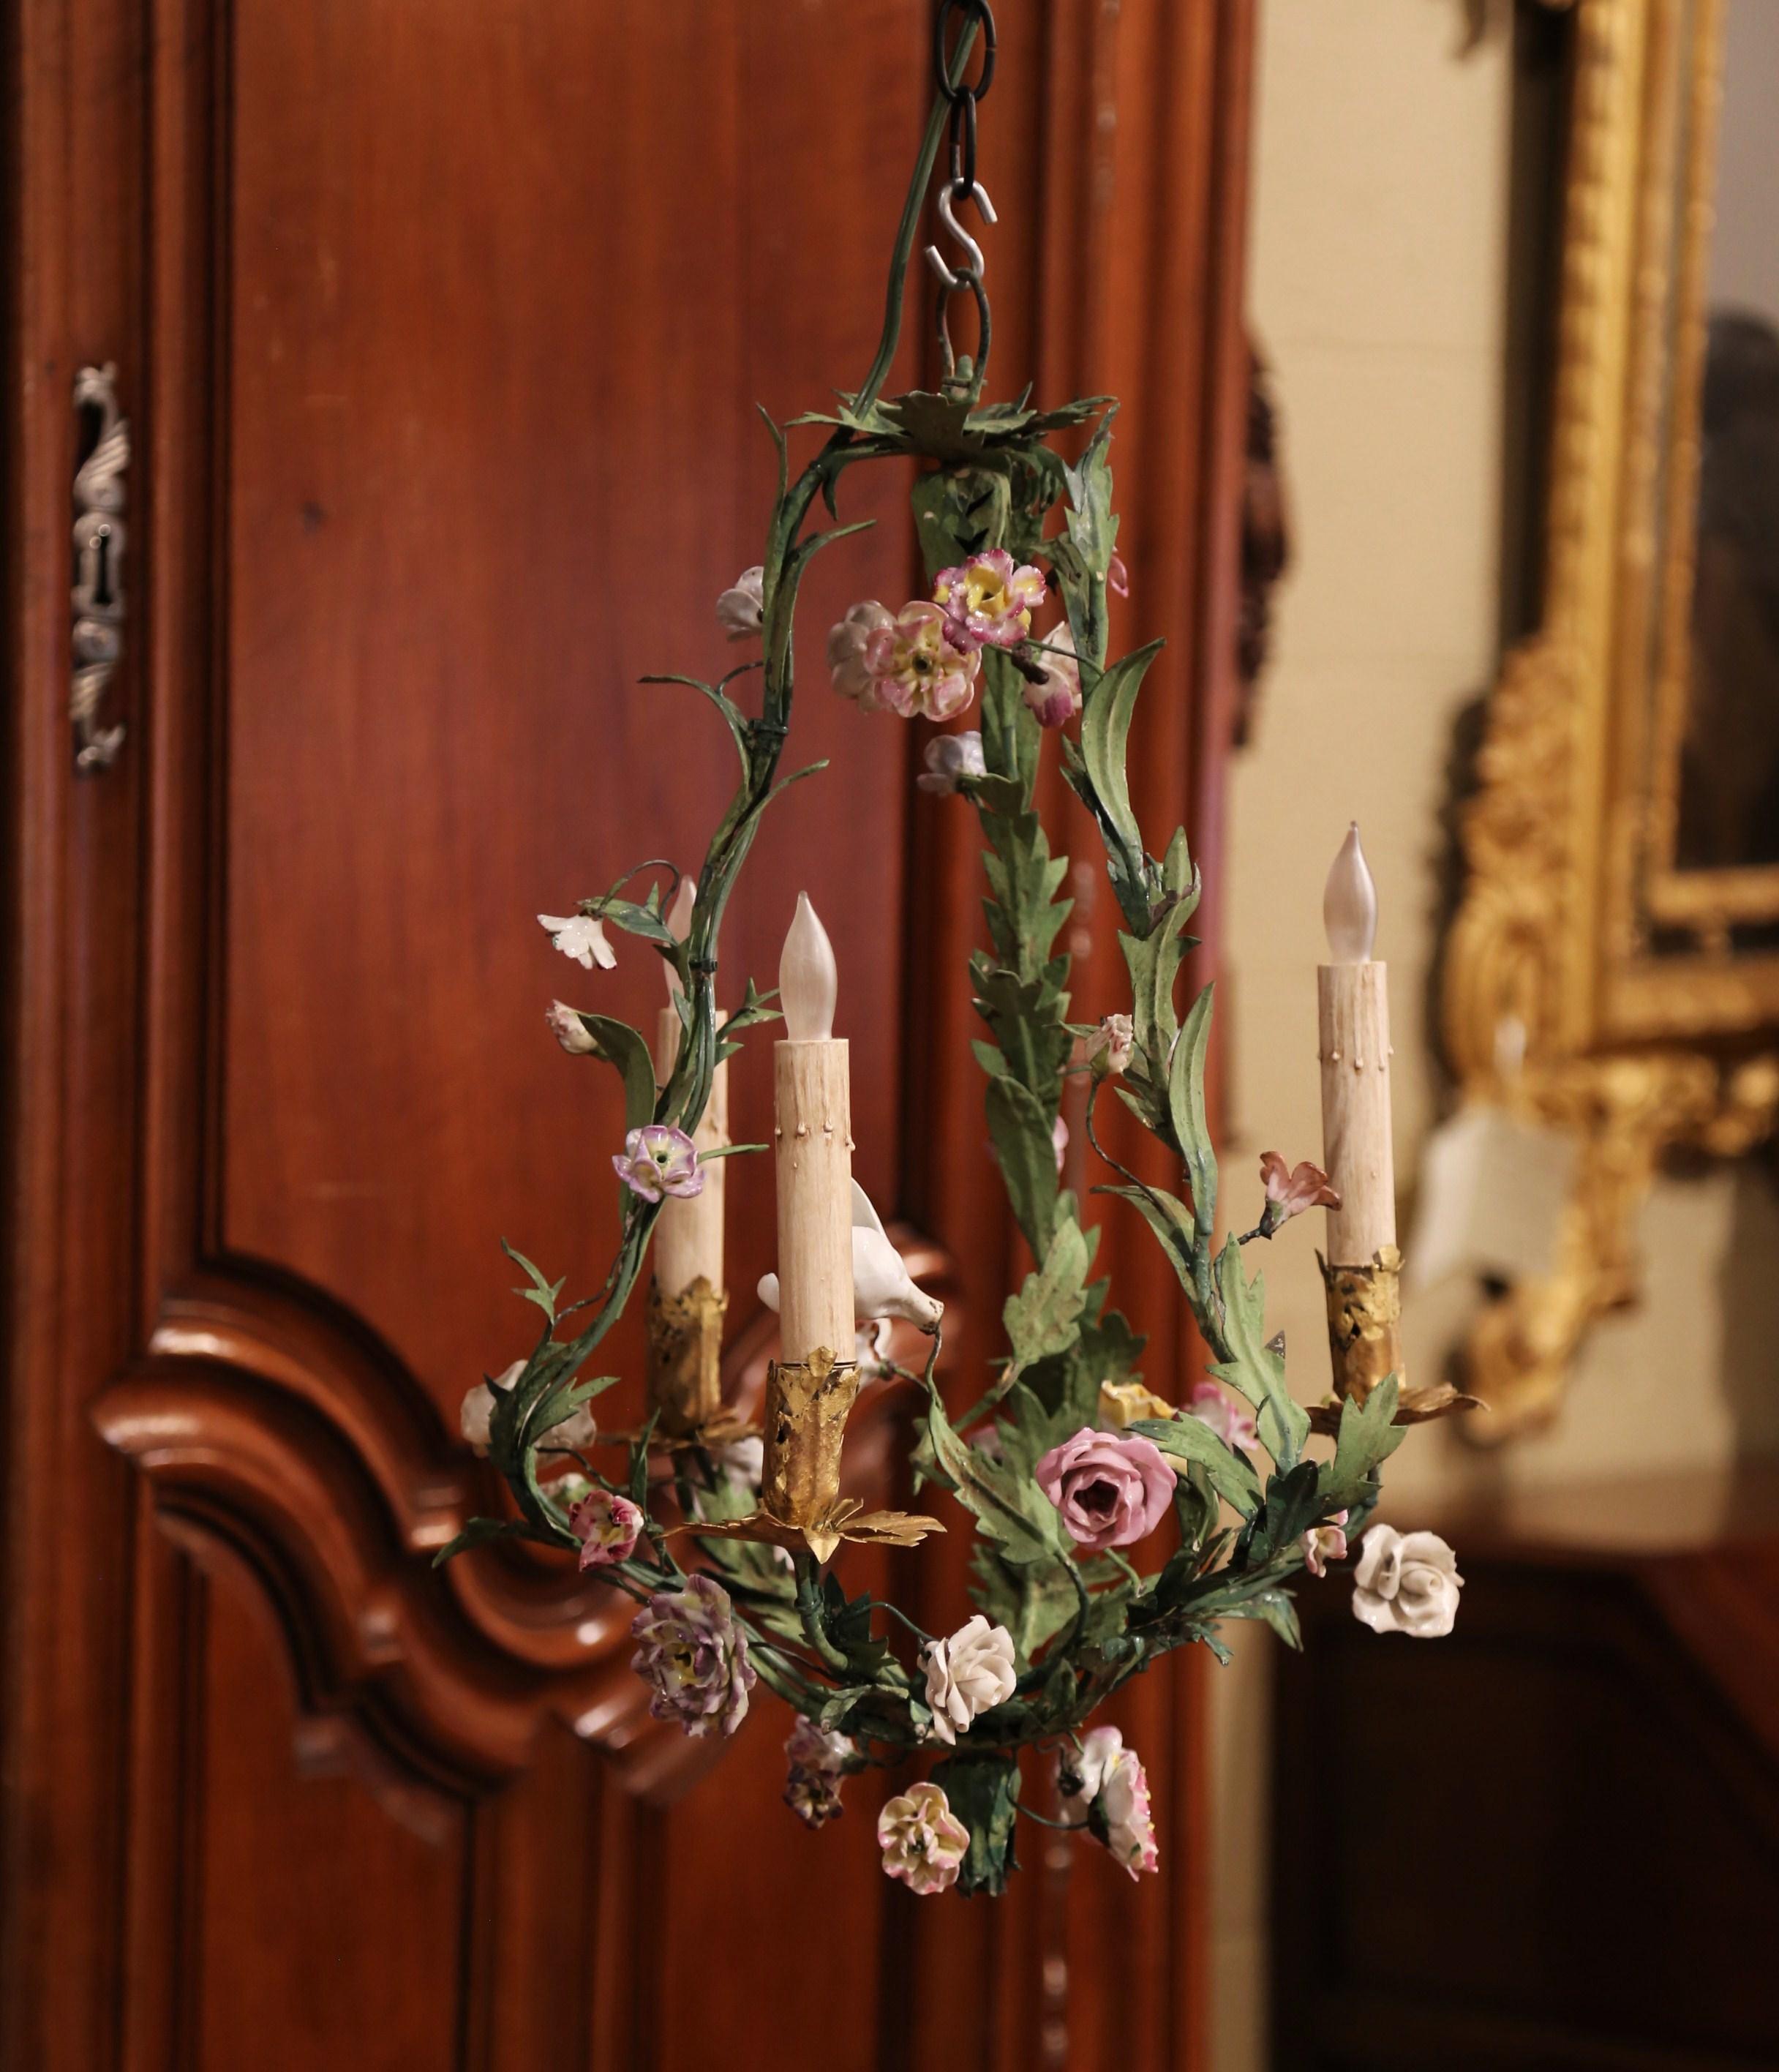 Decorate a girl bedroom or a powder room with this petite antique light fixture; crafted in France, circa 1900, the delicate chandelier features three lights newly wired and is embellished with white, pink and yellow porcelain flowers surrounded by